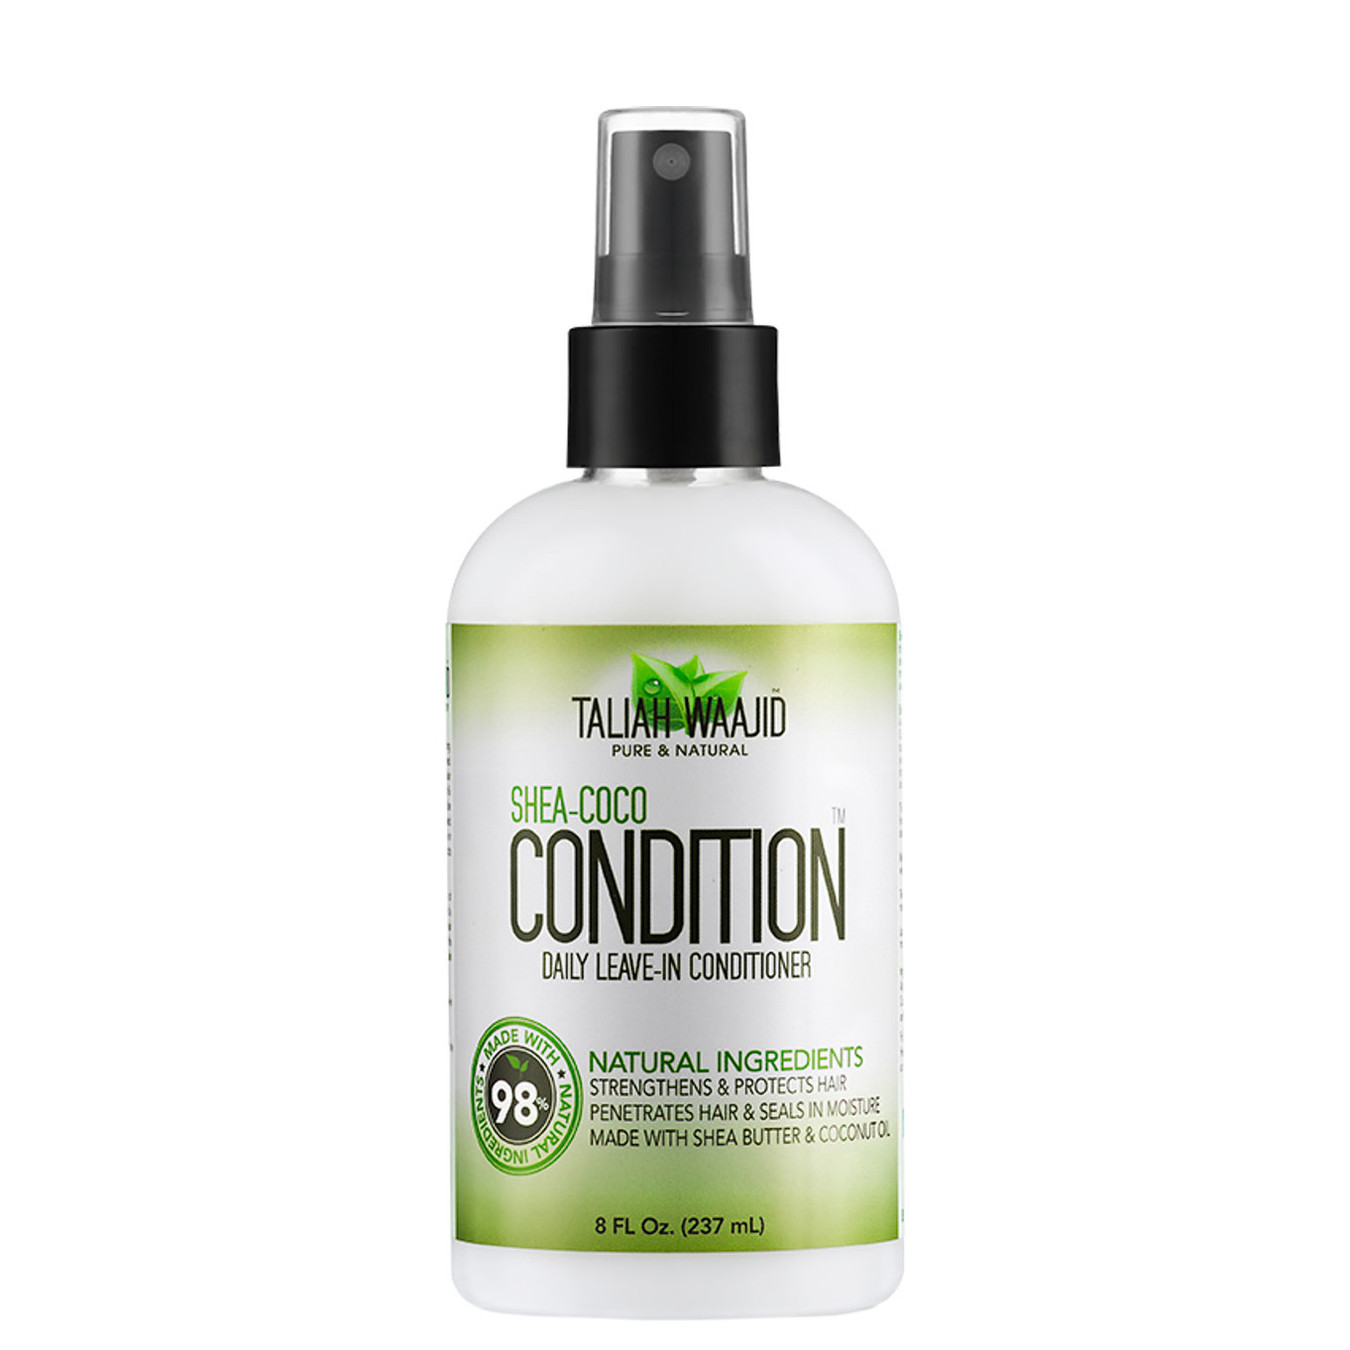 Taliah Waajid Shea-Coco Condition Daily Leave-In Conditioner (8 oz)